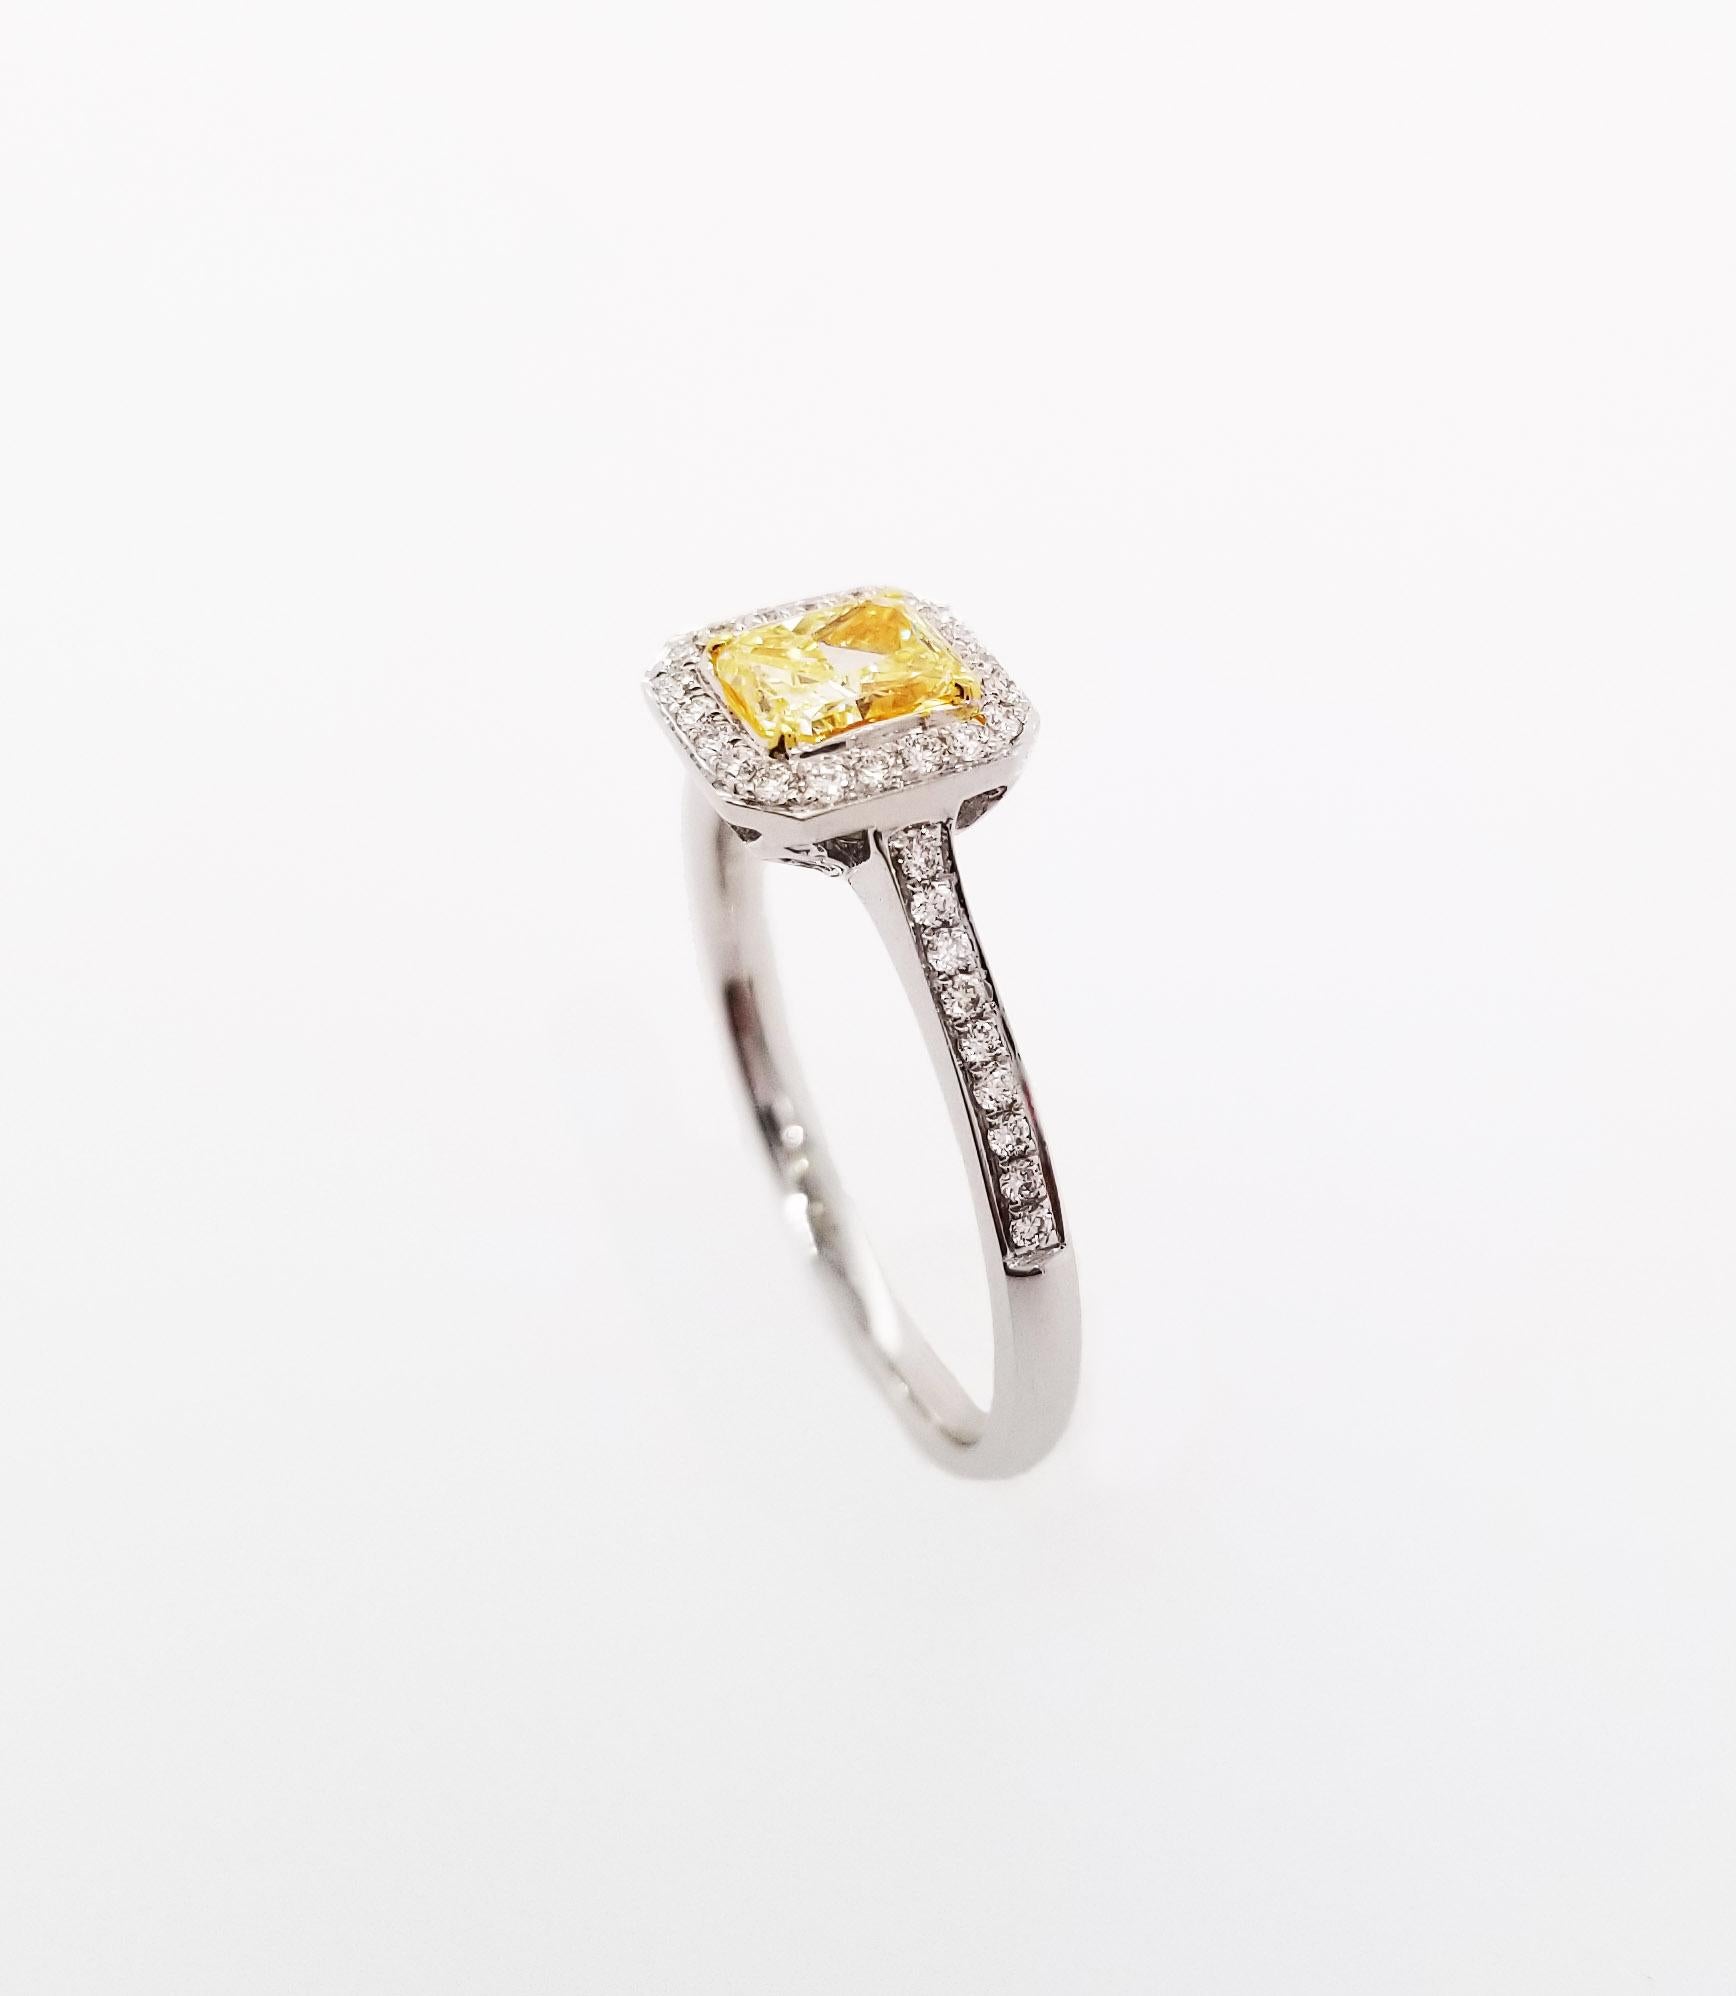 Radiant Cut SCARSELLI Engagement Ring 0.50 Carat Fancy Yellow Diamond GIA Certified